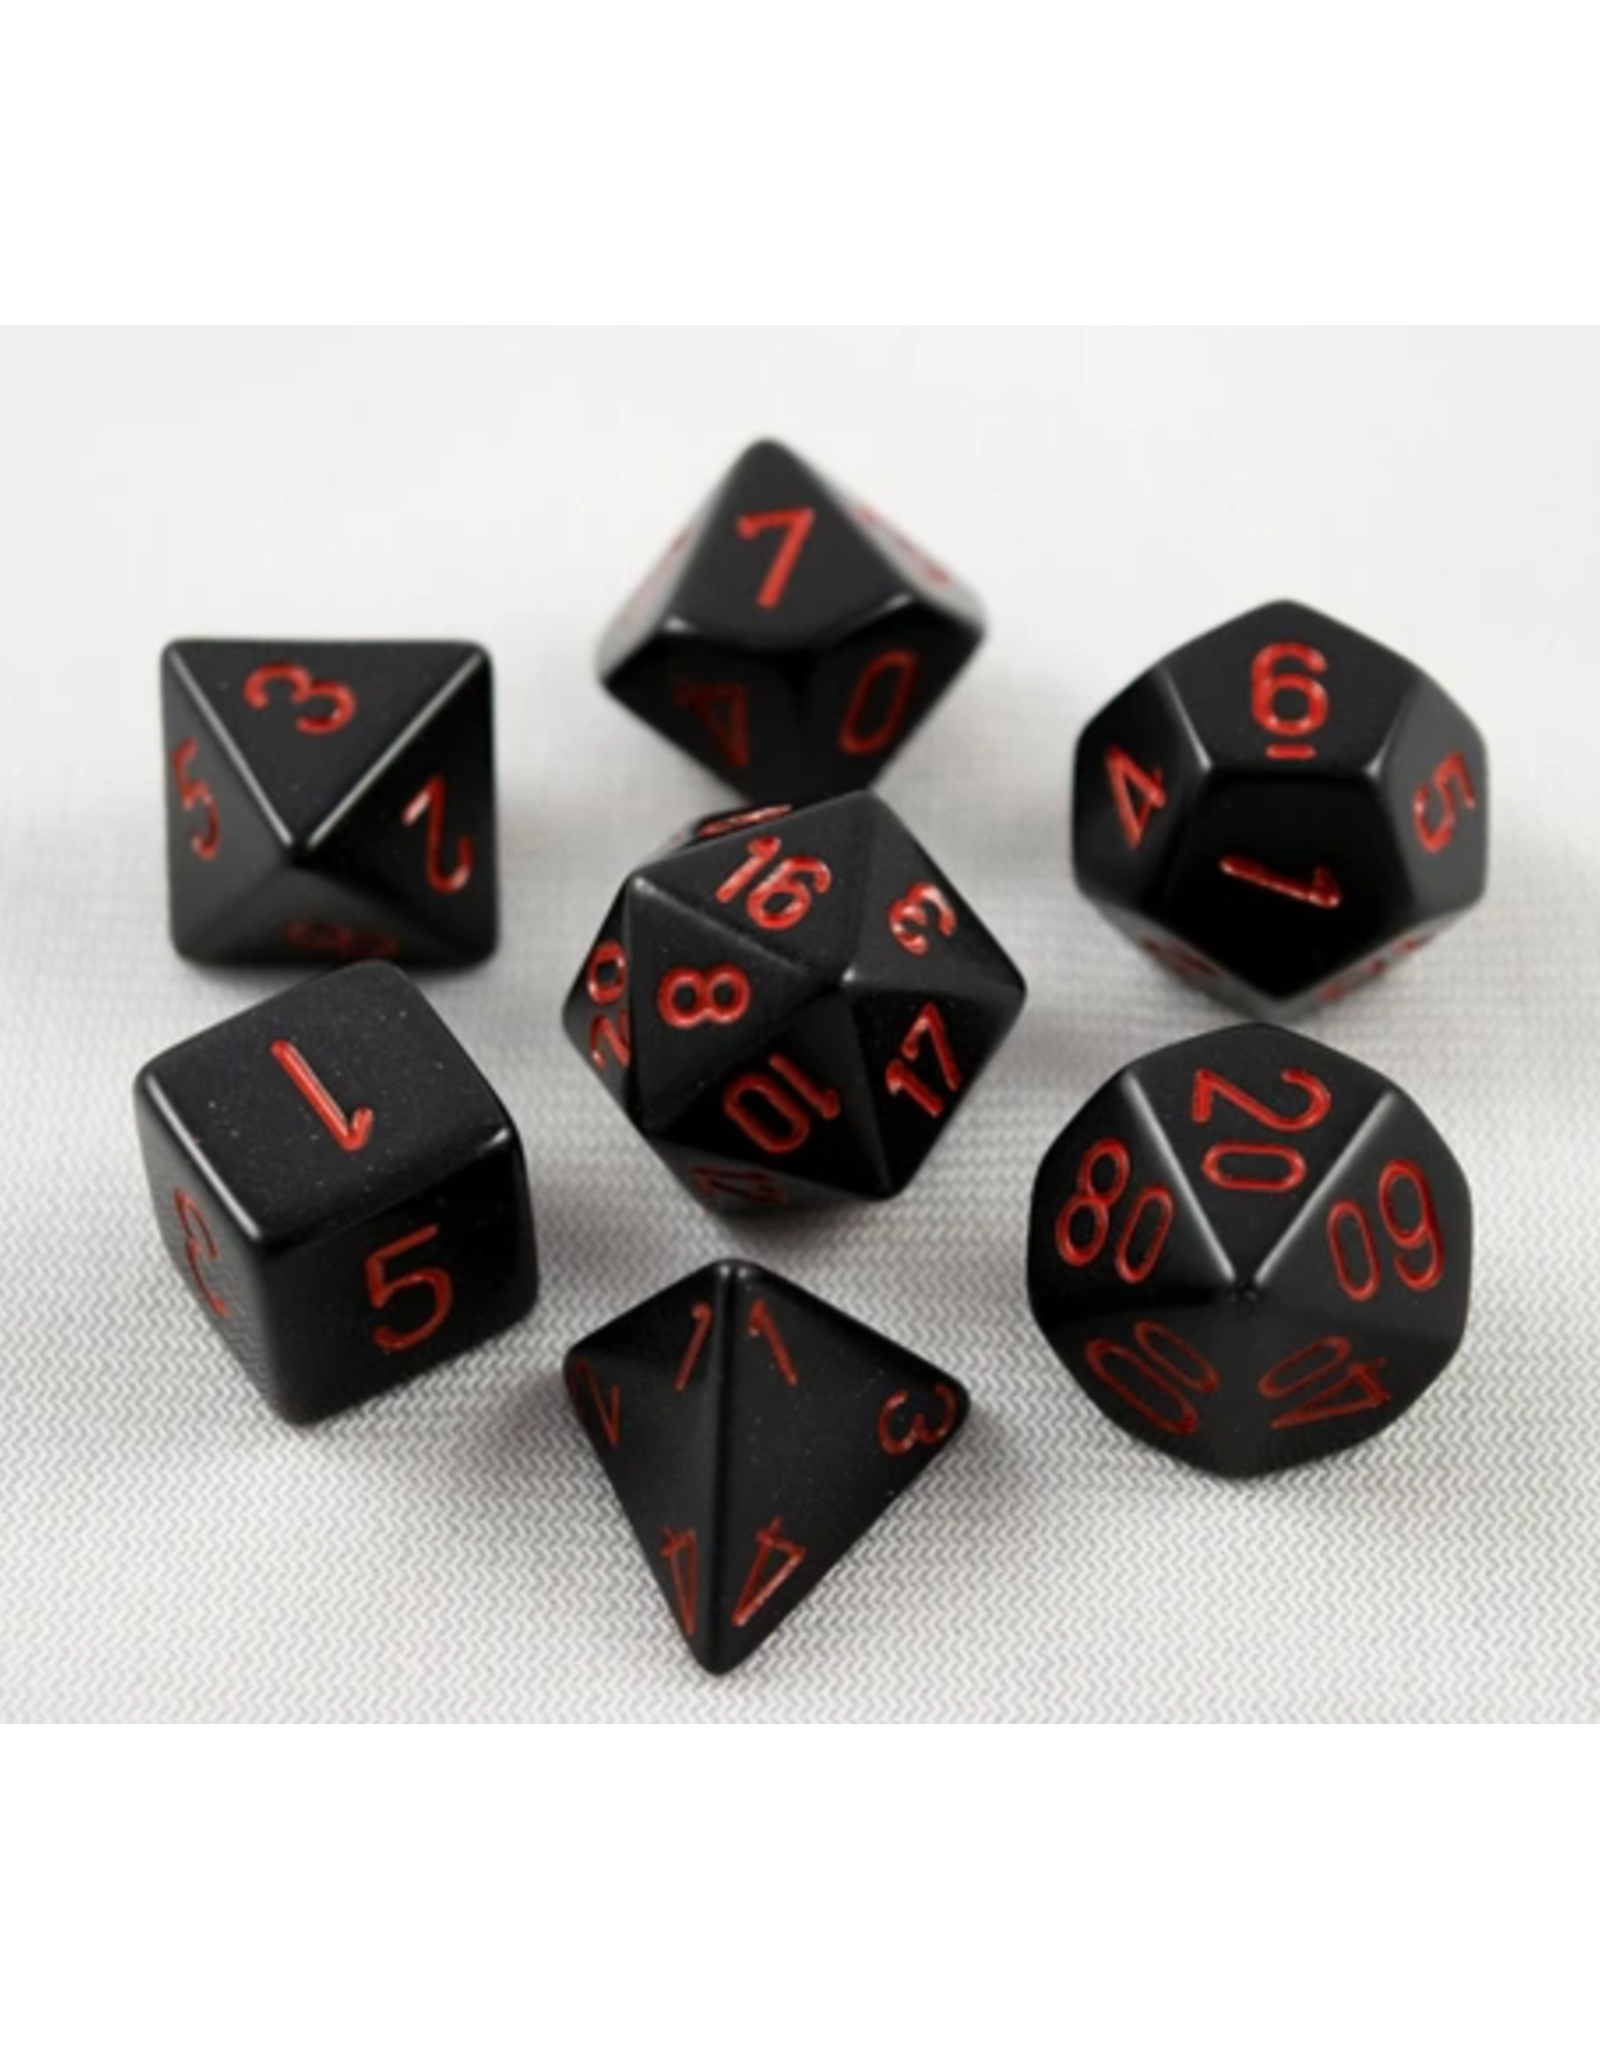 Chessex 7-Set Polyhedral Black with Red